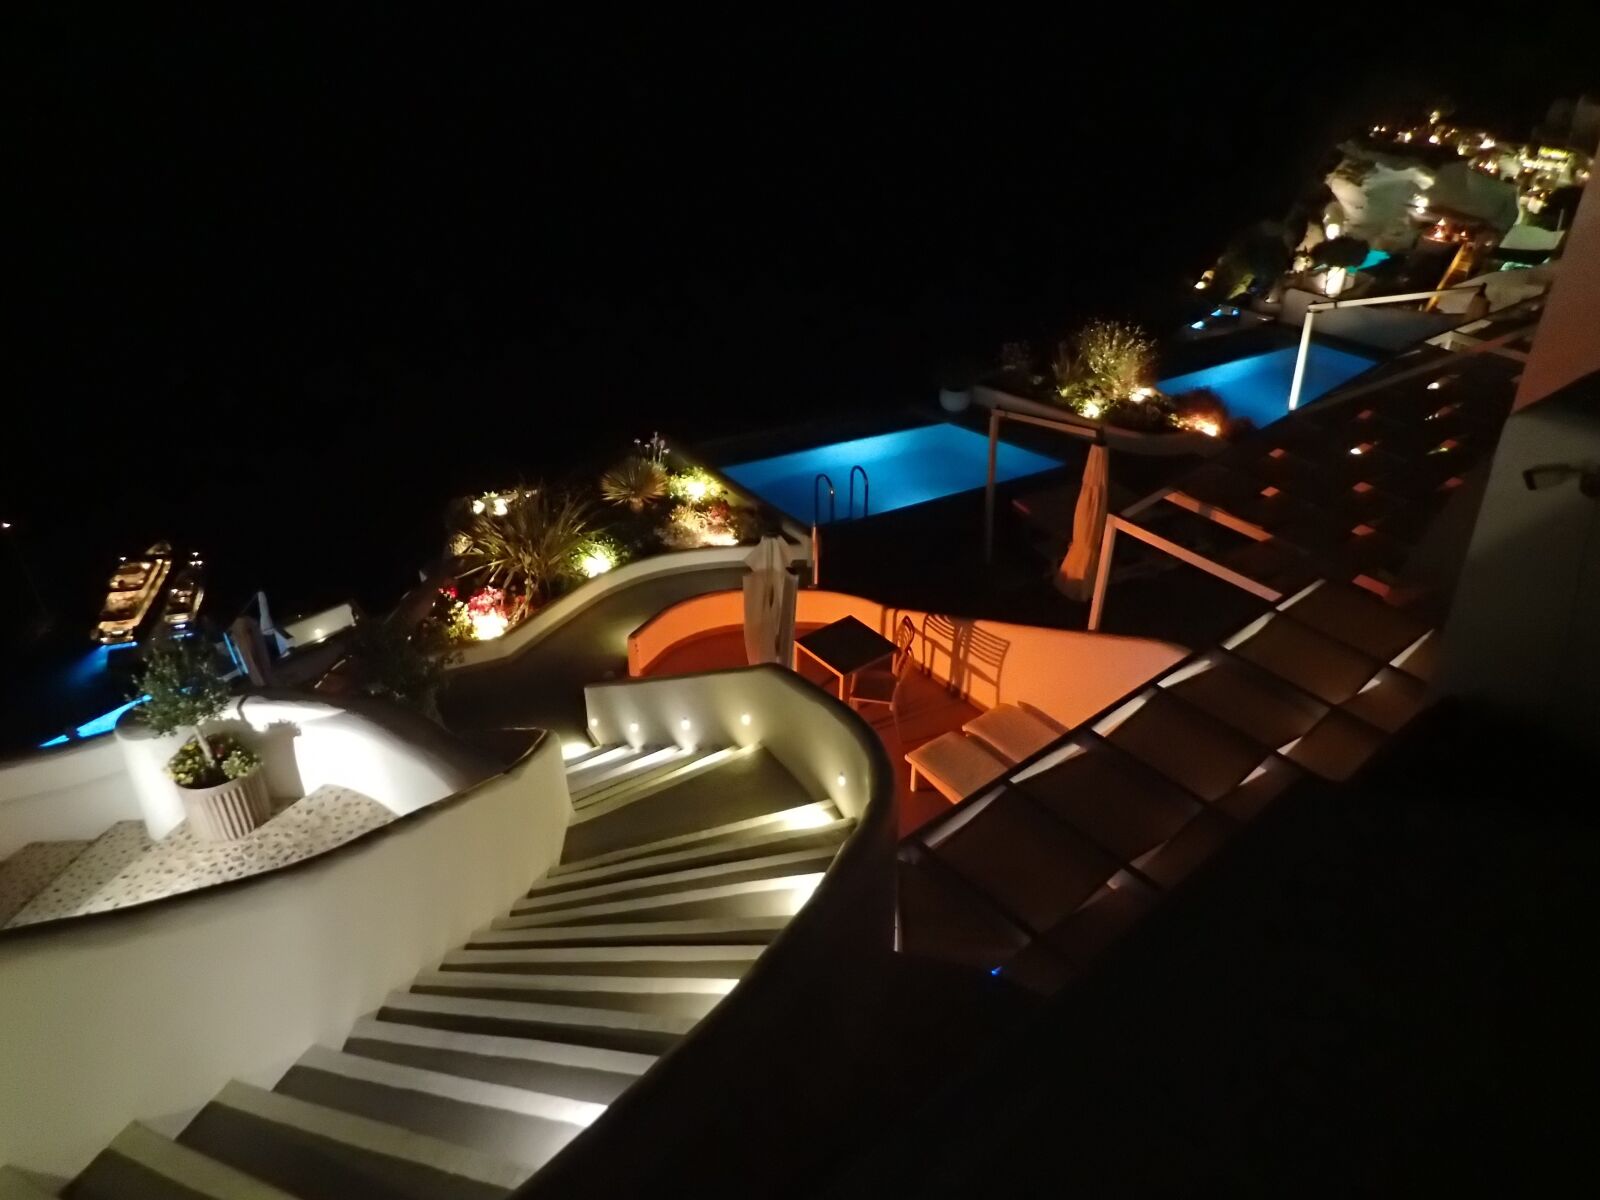 Olympus TG-4 sample photo. Night, colors, stairs photography